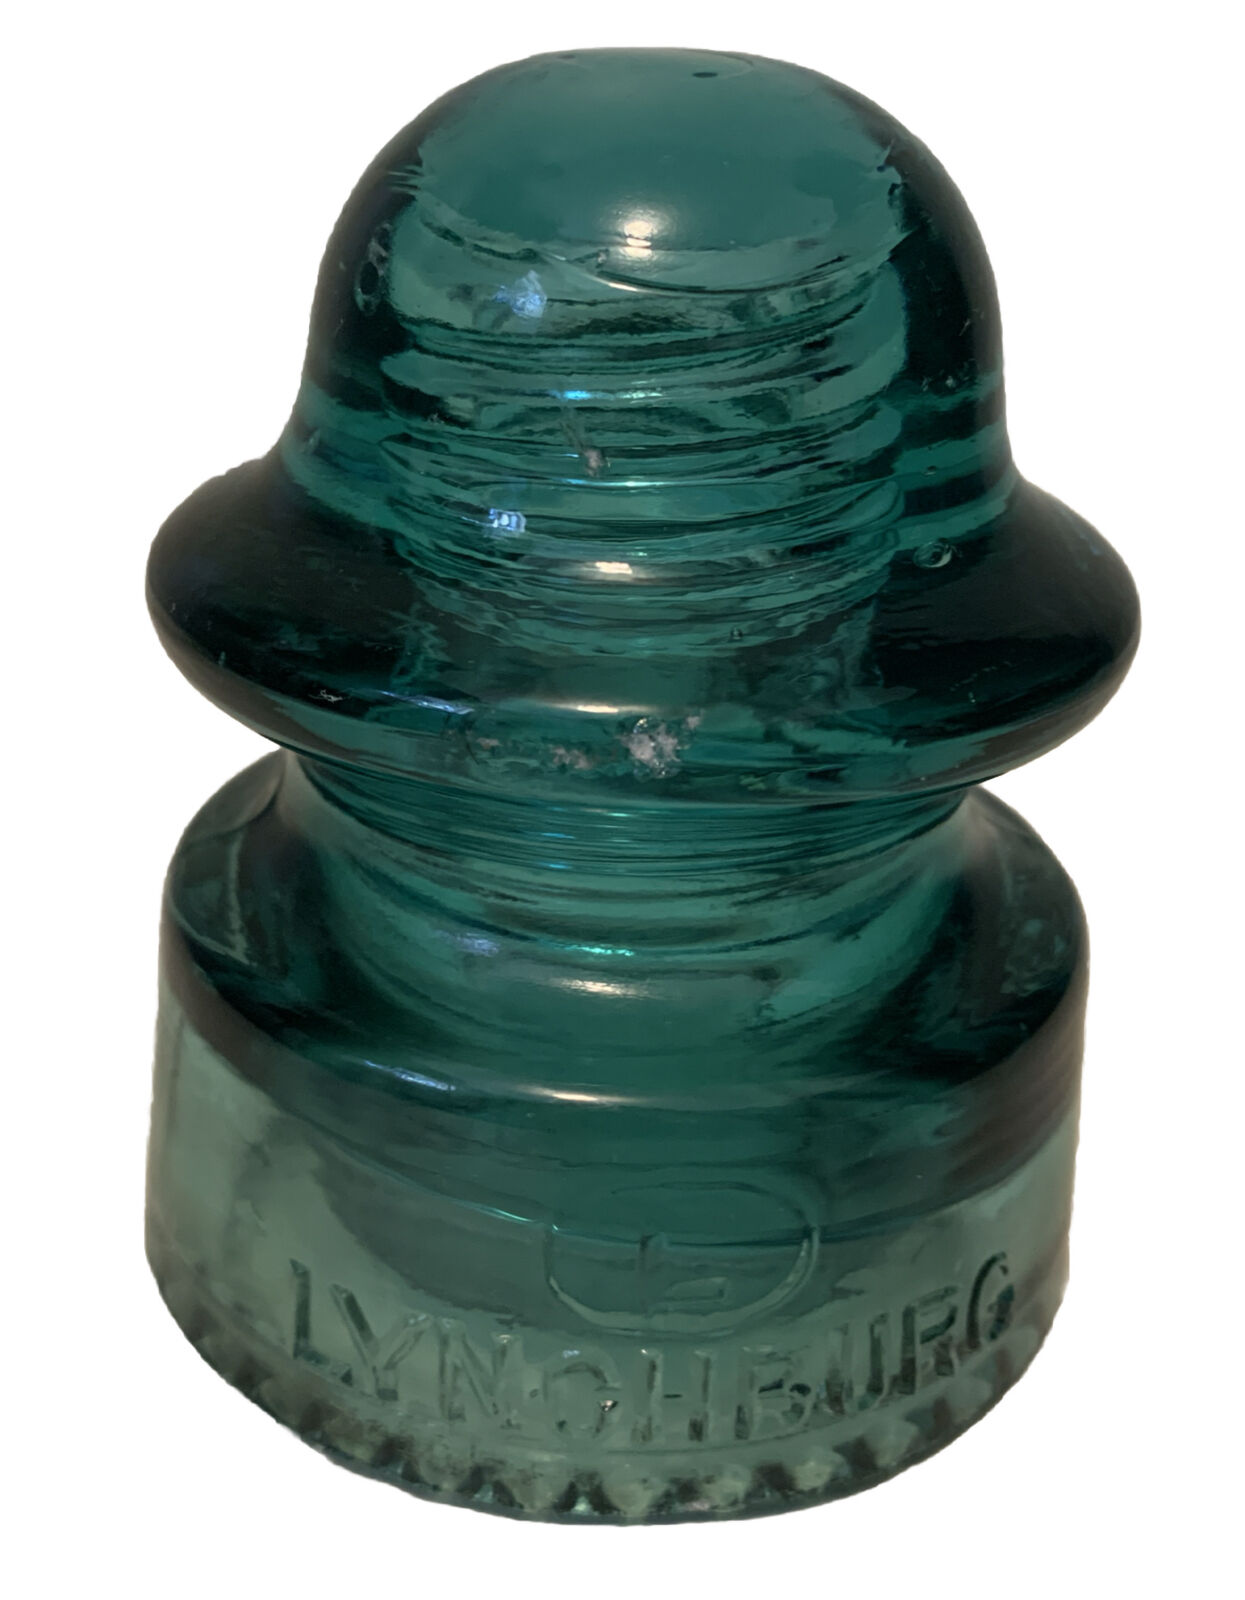 Vintage Green Blue Glass Lynchburg Electrical Insulator No. 38 Made in USA